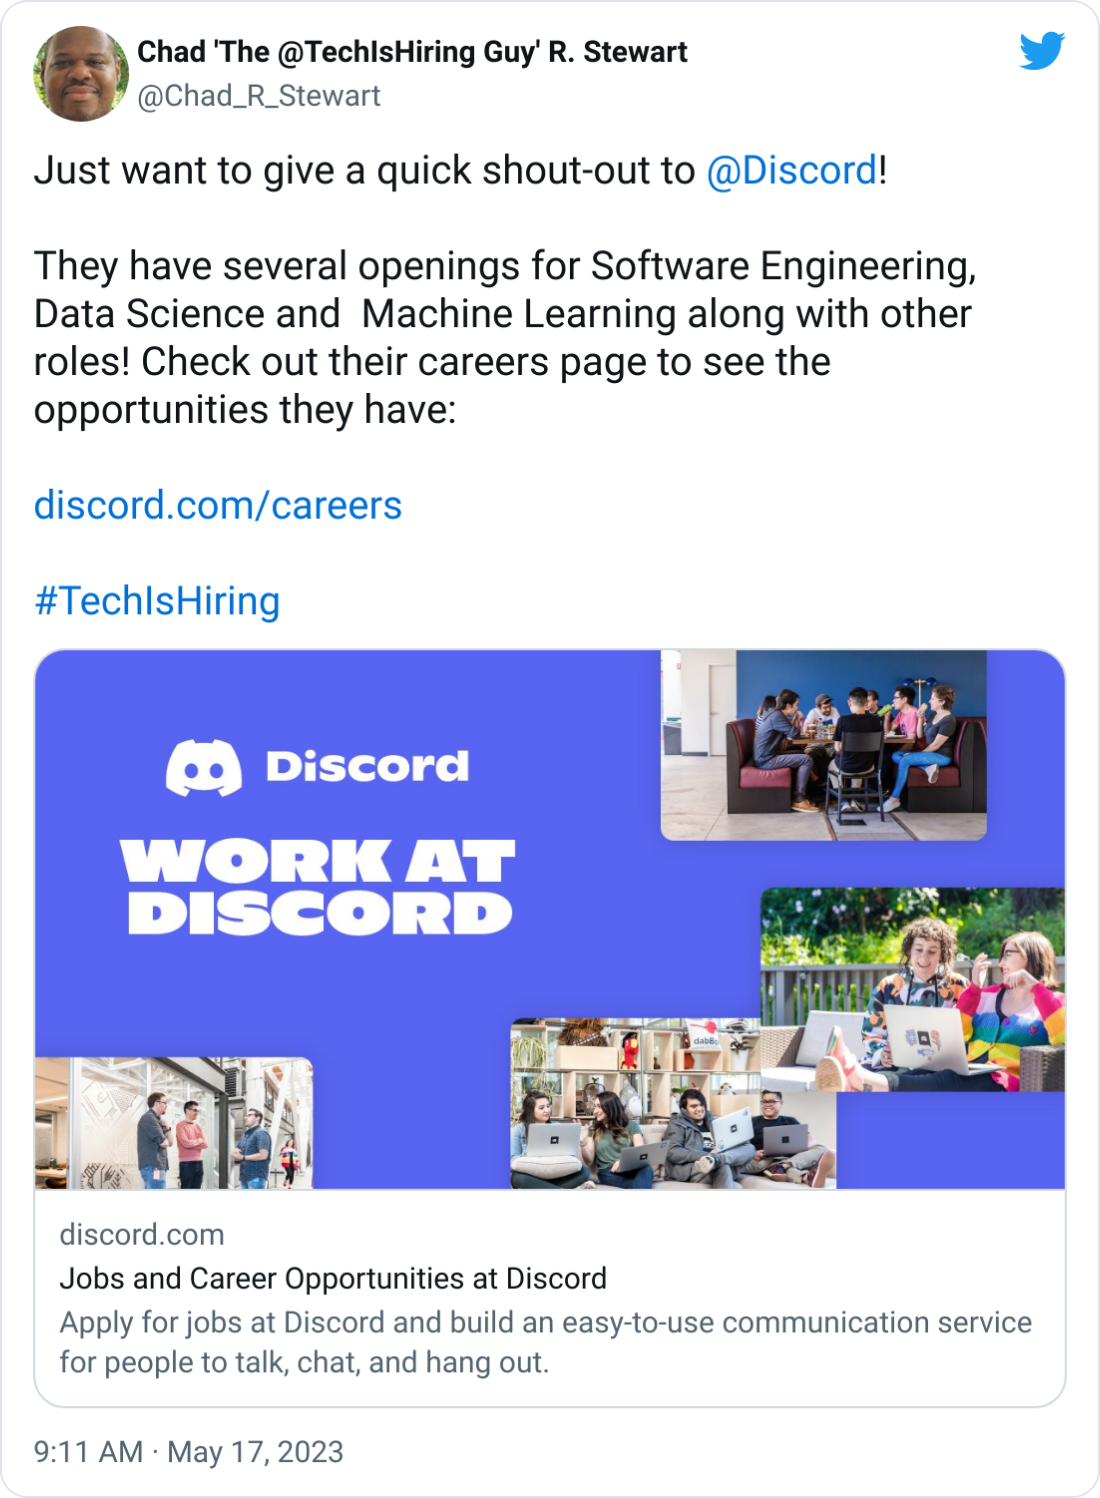  Chad 'The @TechIsHiring Guy' R. Stewart @Chad_R_Stewart Just want to give a quick shout-out to  @Discord !  They have several openings for Software Engineering, Data Science and  Machine Learning along with other roles! Check out their careers page to see the opportunities they have:  https://discord.com/careers  #TechIsHiring